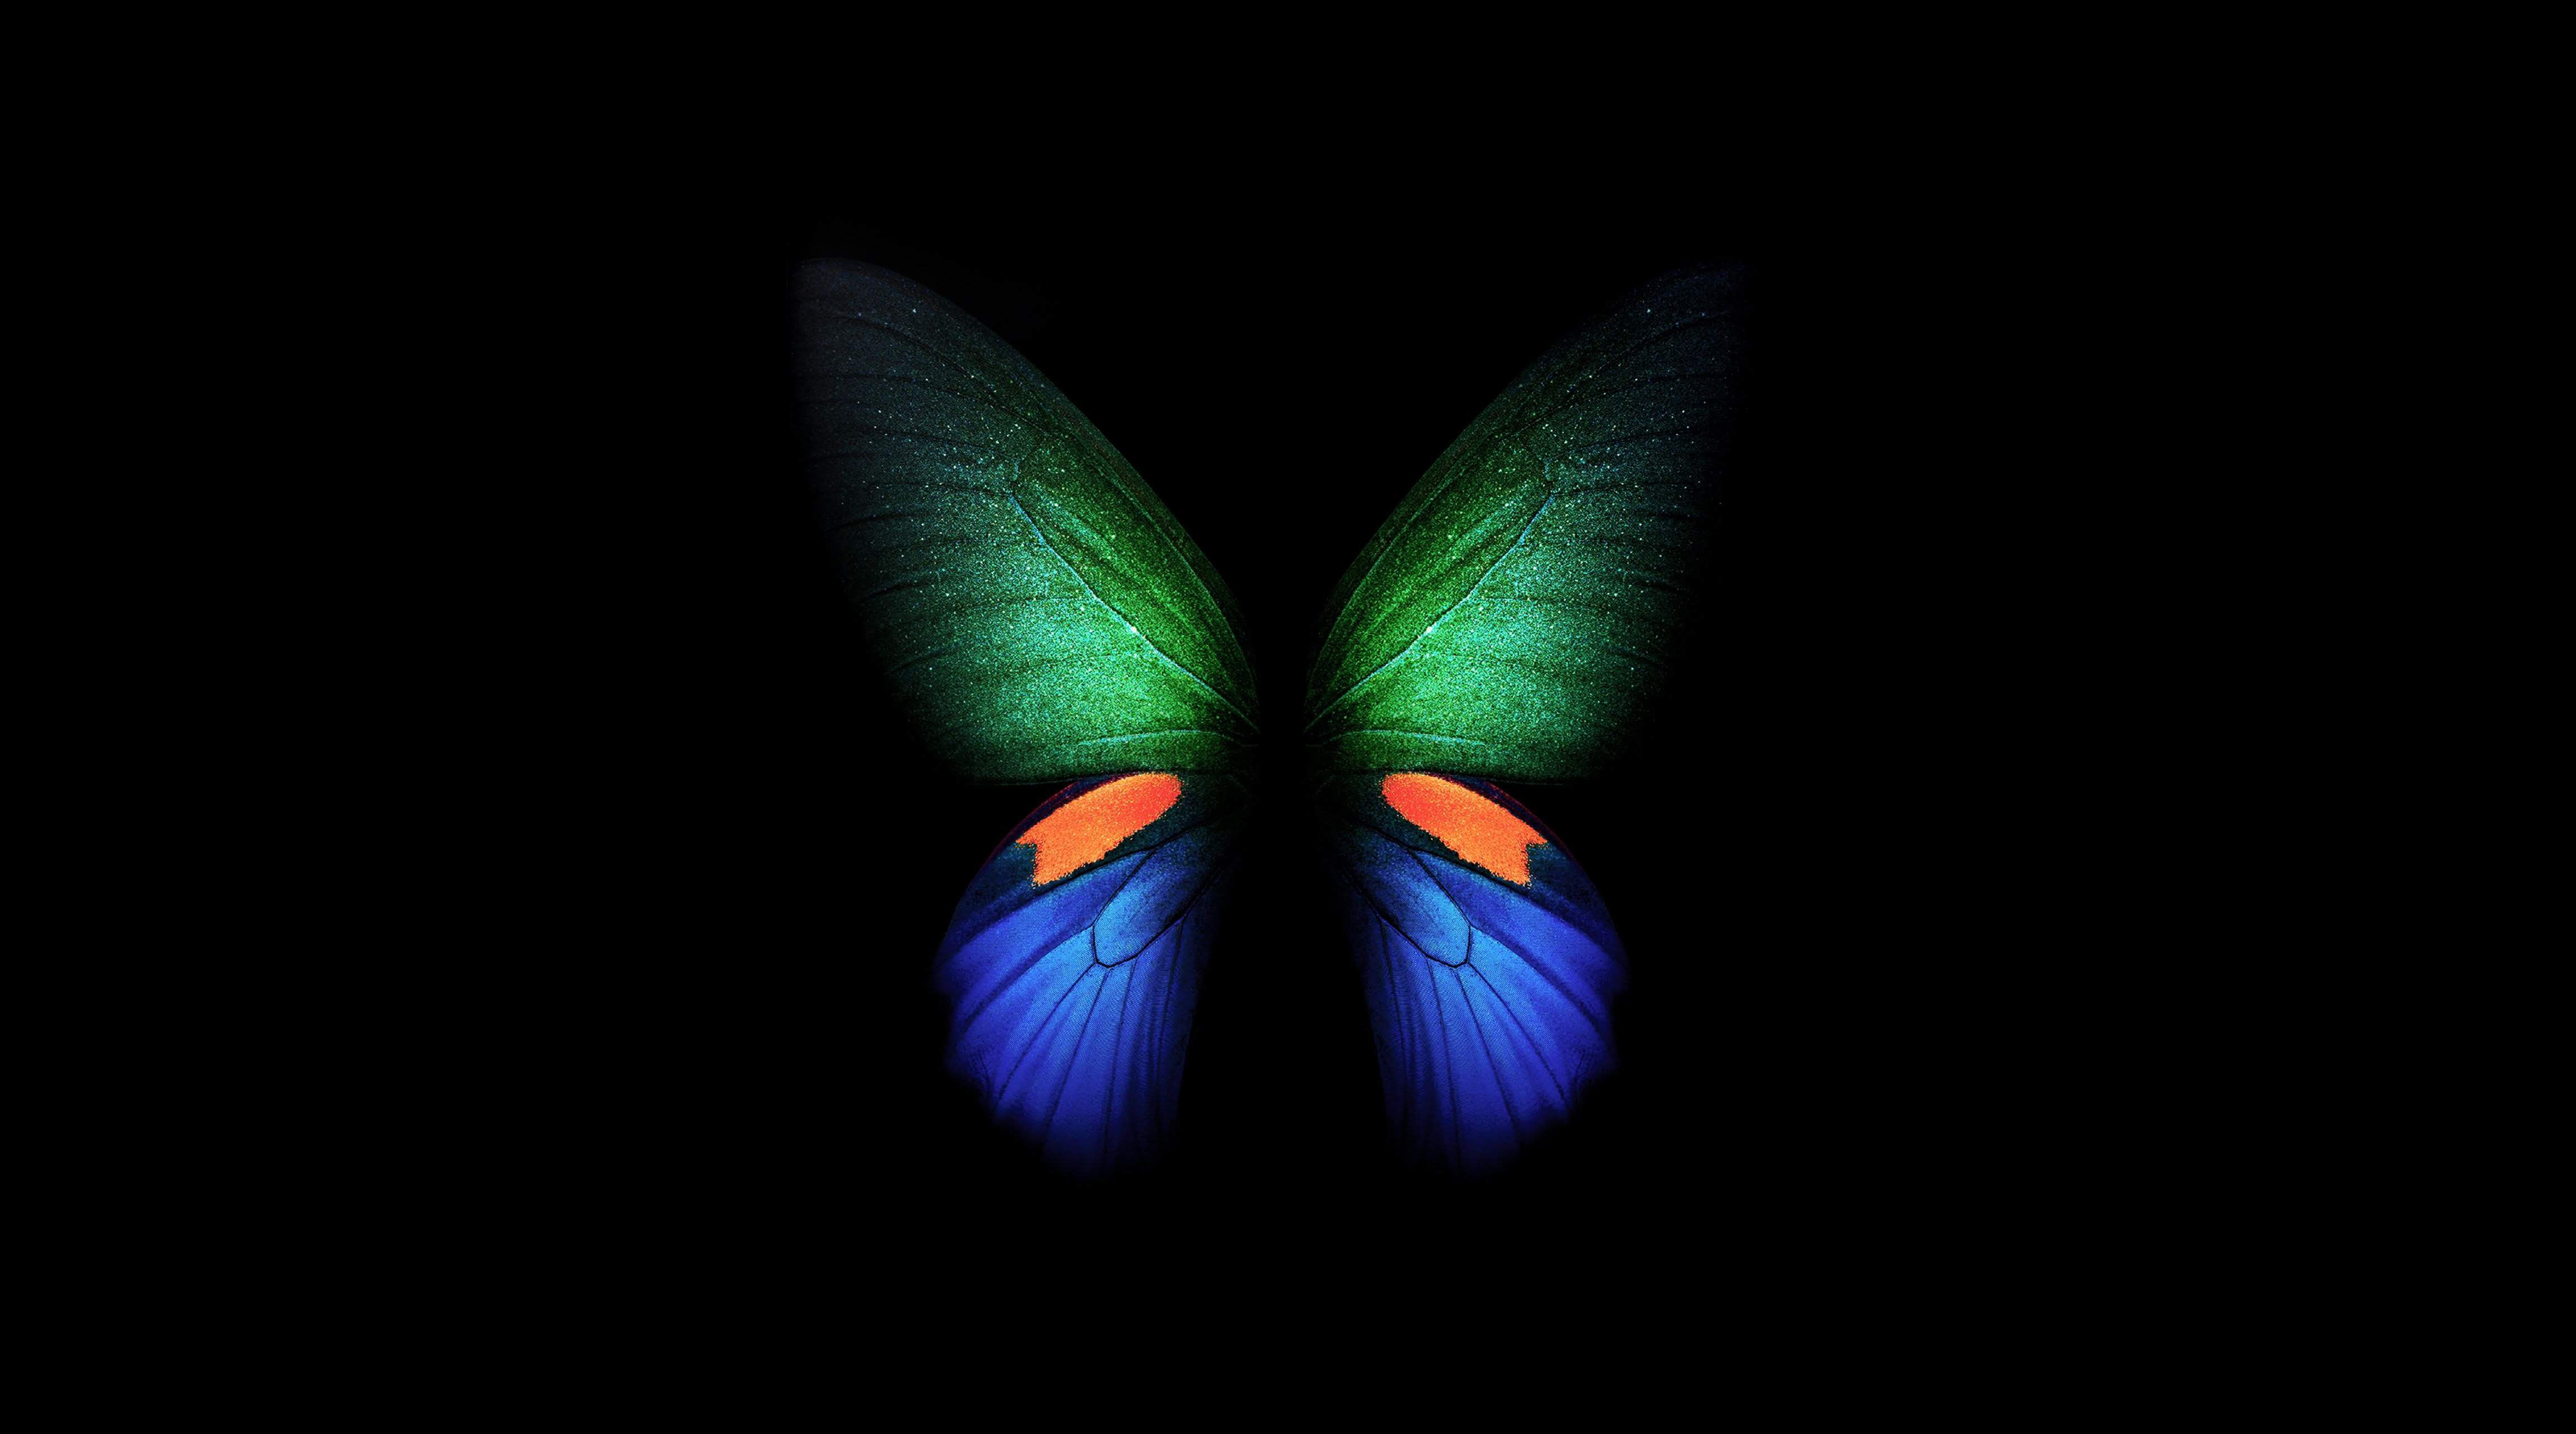 HD wallpaper, Black Background, Simple, Stock, Butterfly, Samsung Galaxy Fold